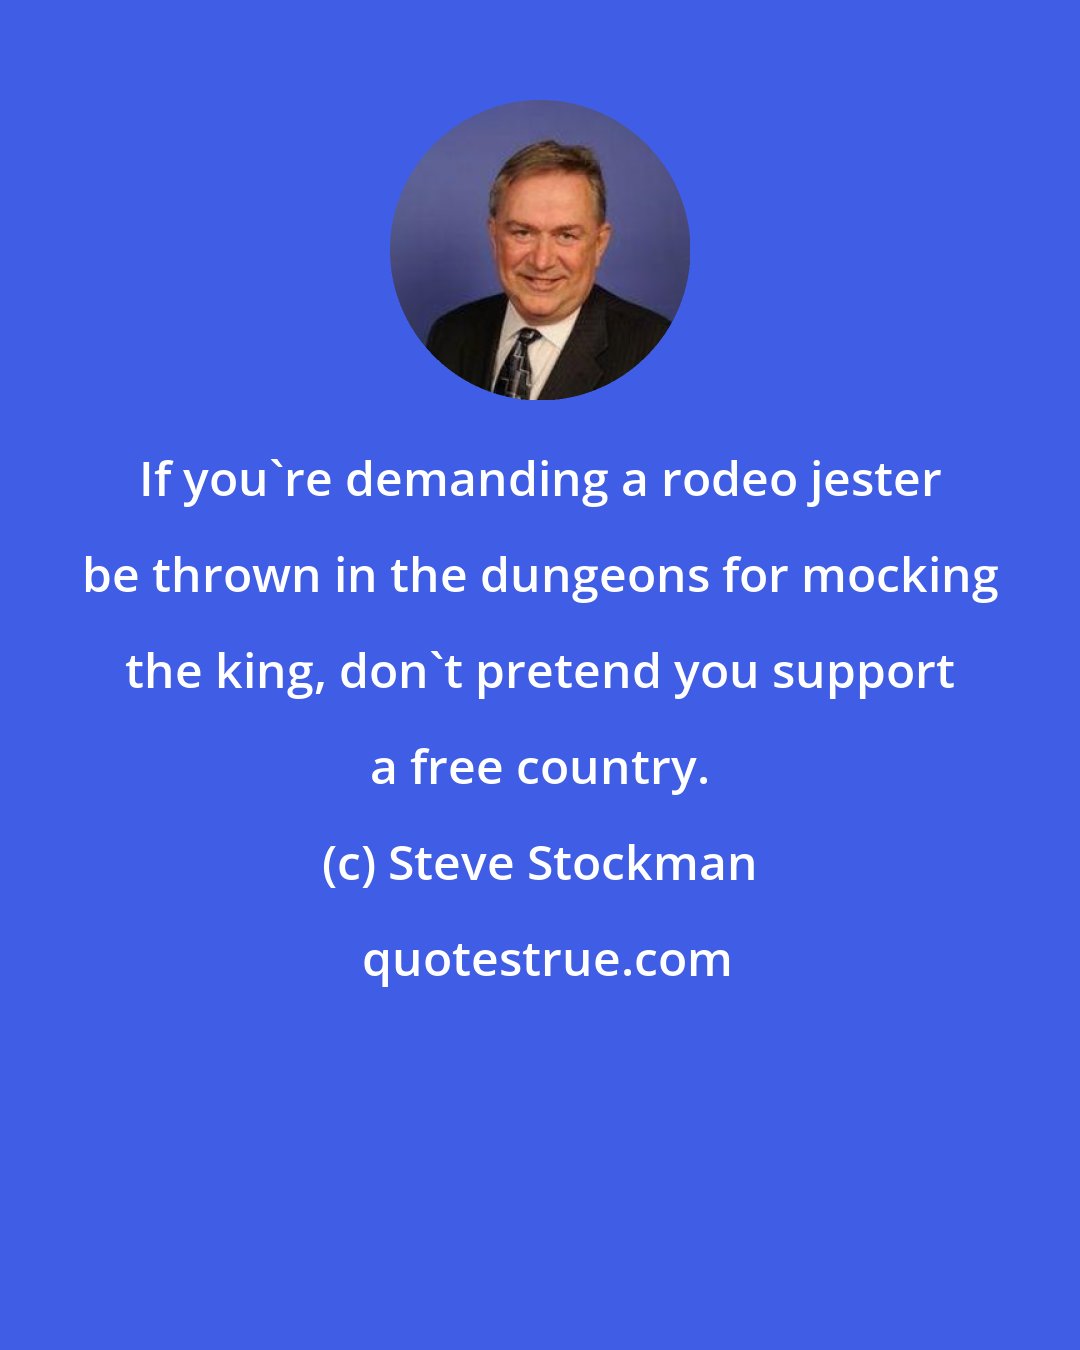 Steve Stockman: If you're demanding a rodeo jester be thrown in the dungeons for mocking the king, don't pretend you support a free country.